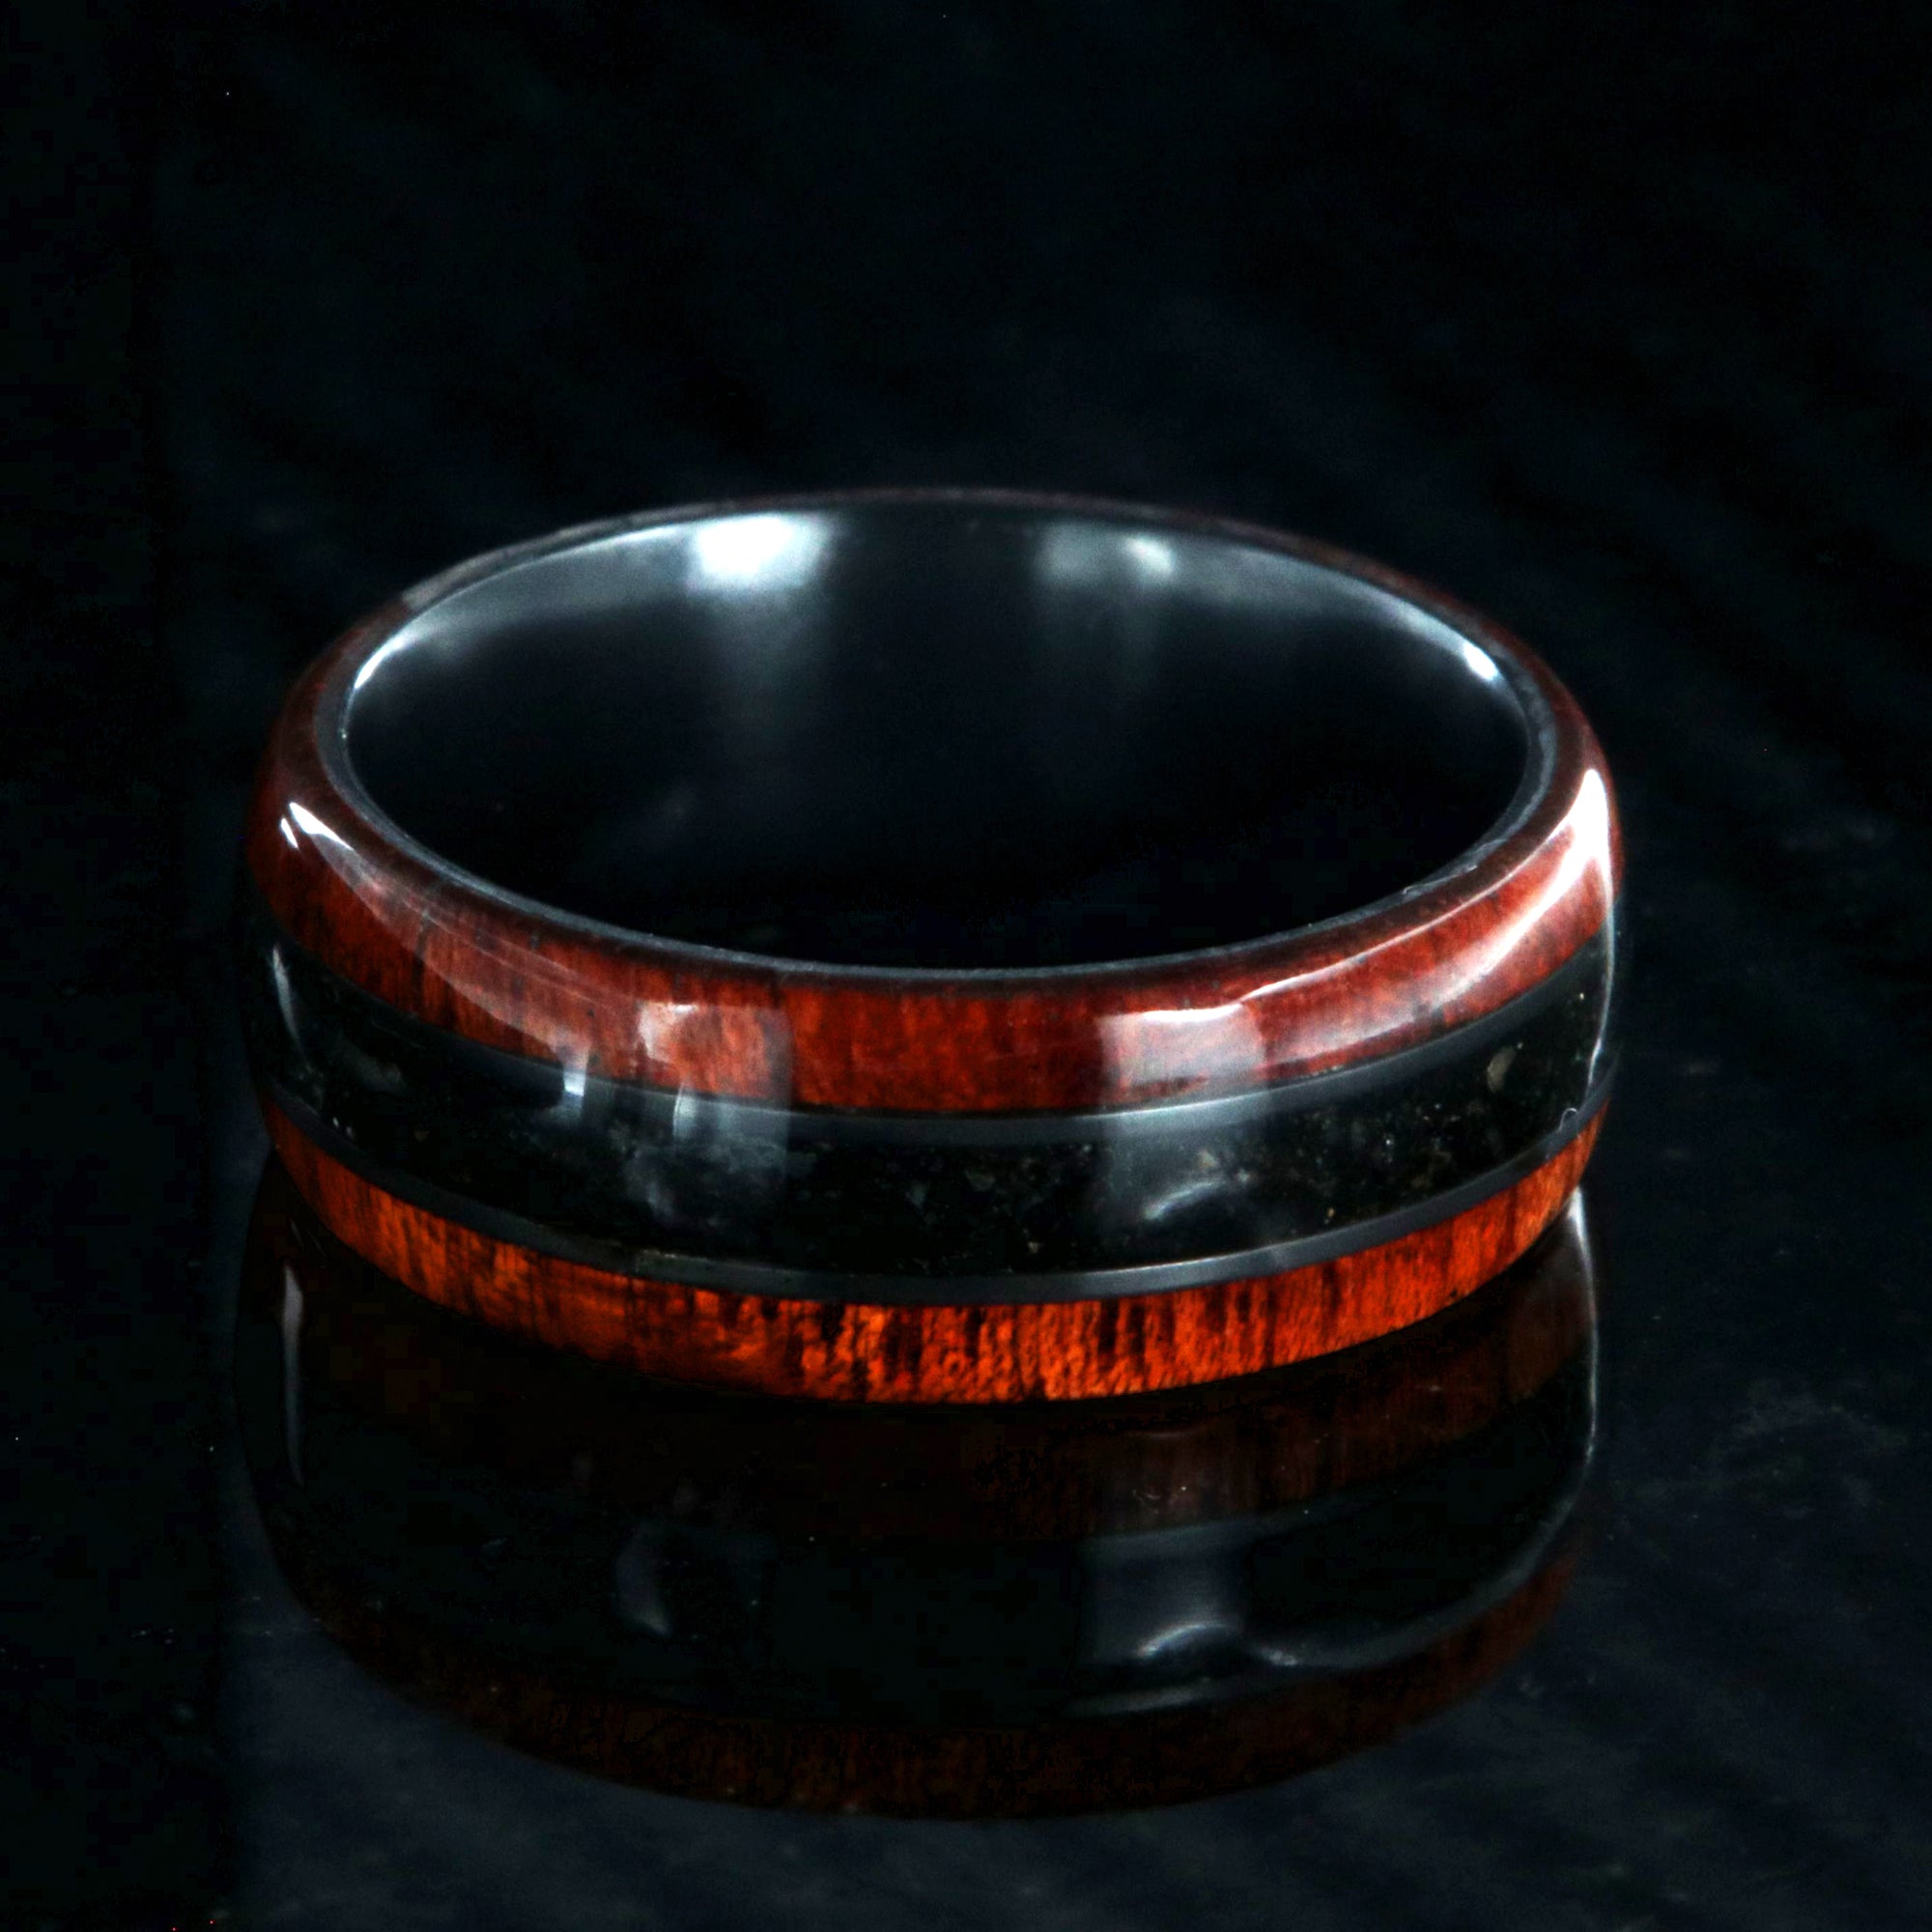 8mm wide wedding band with bloodwood edges with a dark dinosaur bone inlay and a black zirconium sleeve